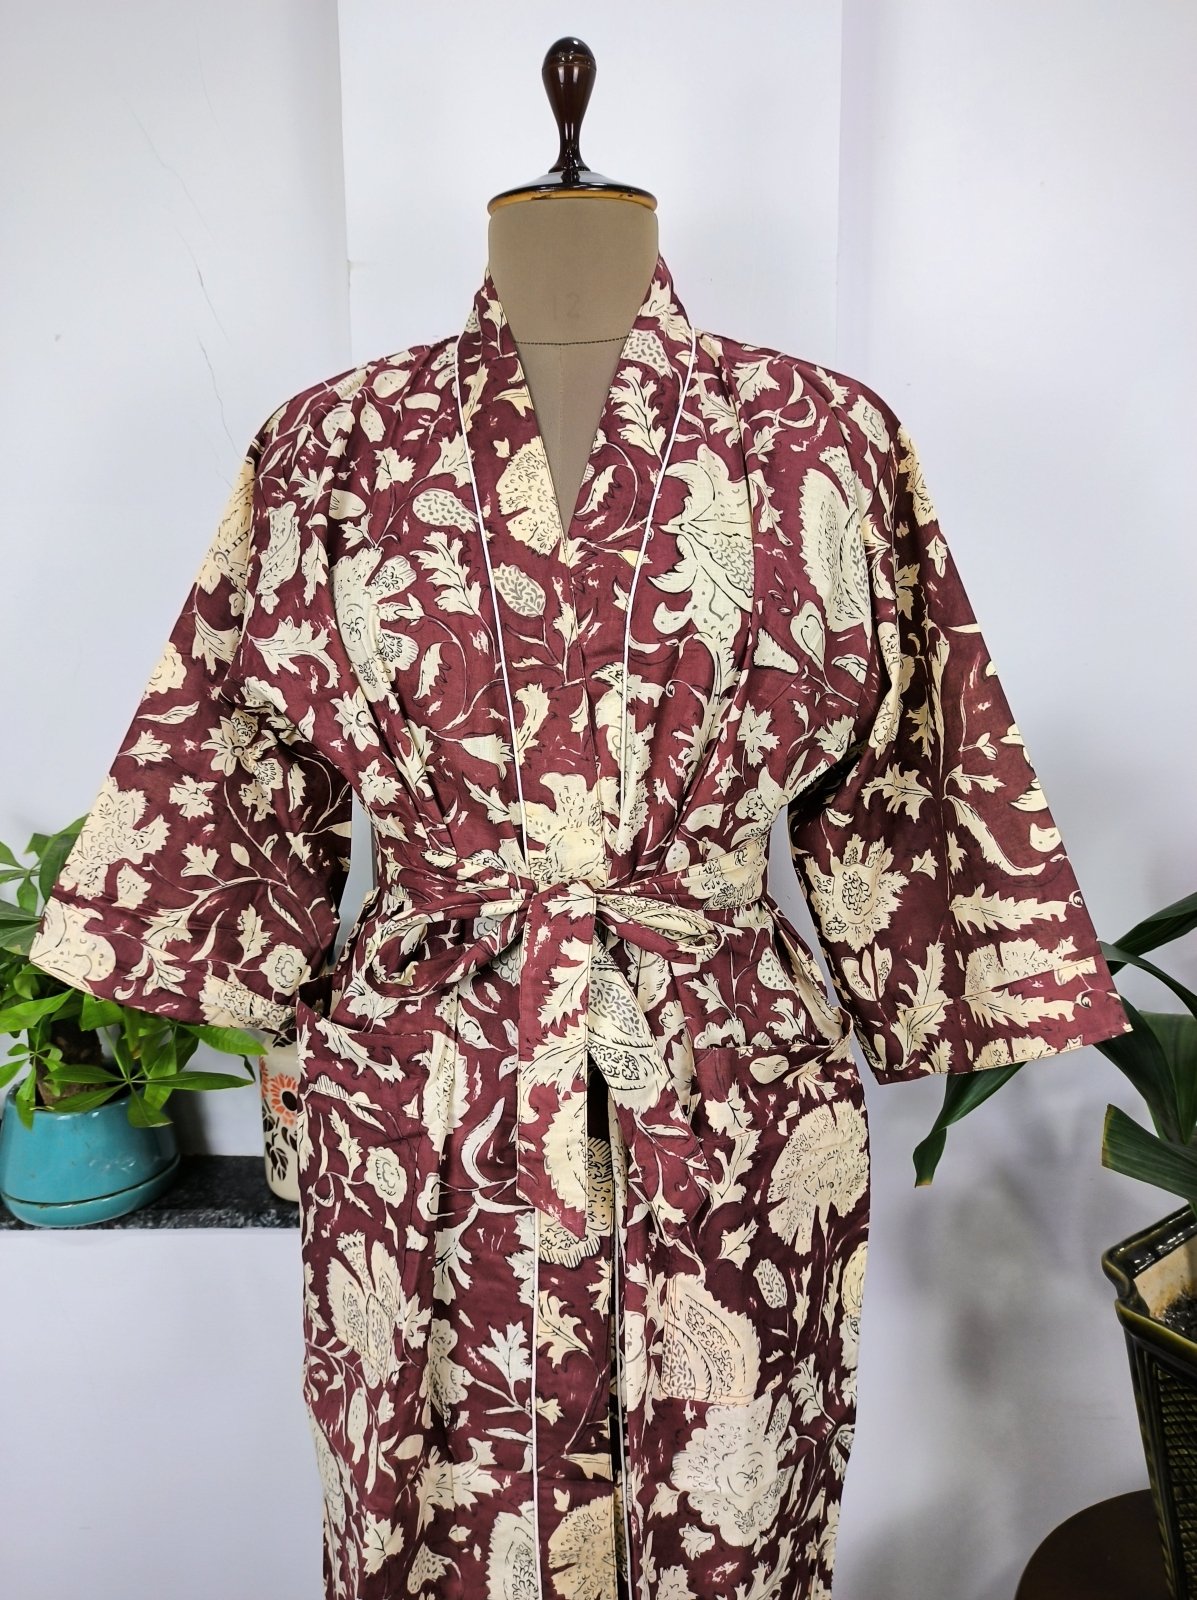 Pure Cotton Kimono Indian Handprinted Boho House Robe Summer Dress | Rusty Red Garden Floral Rose Luxury Cover Up | Maternity Mom Bridal - The Eastern Loom